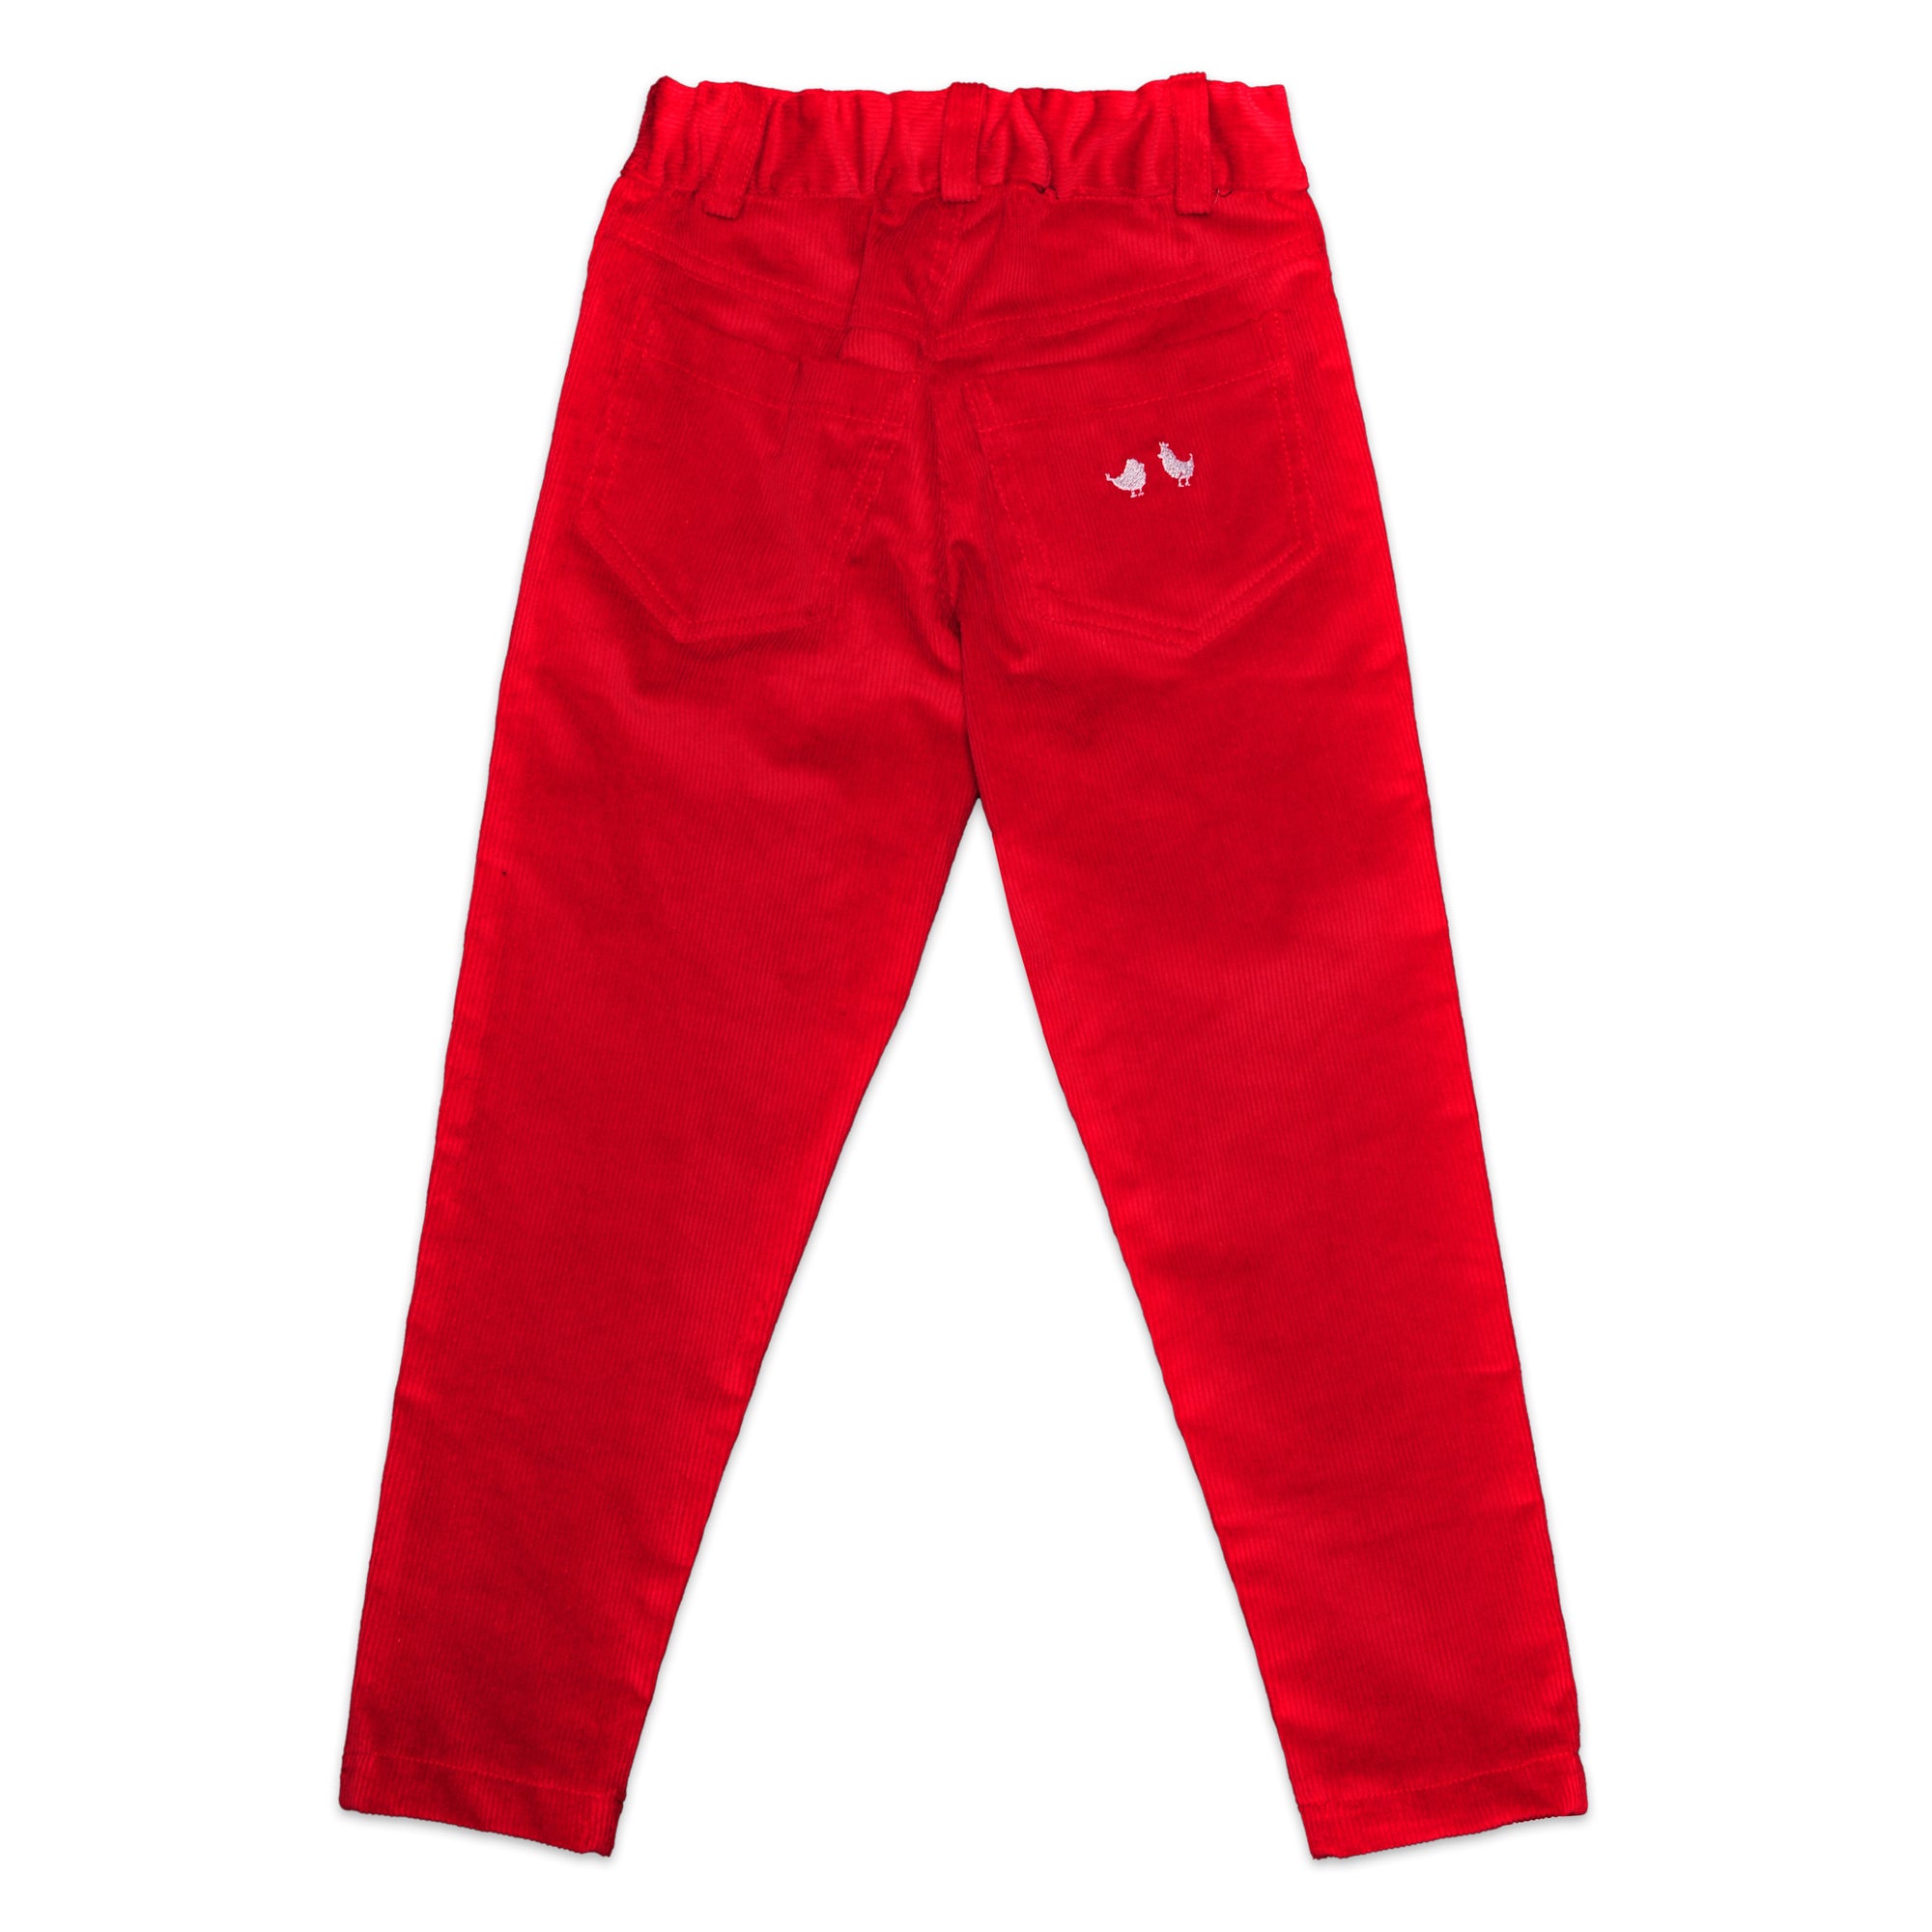 Corduroy Pants In Red - Cou Cou Baby